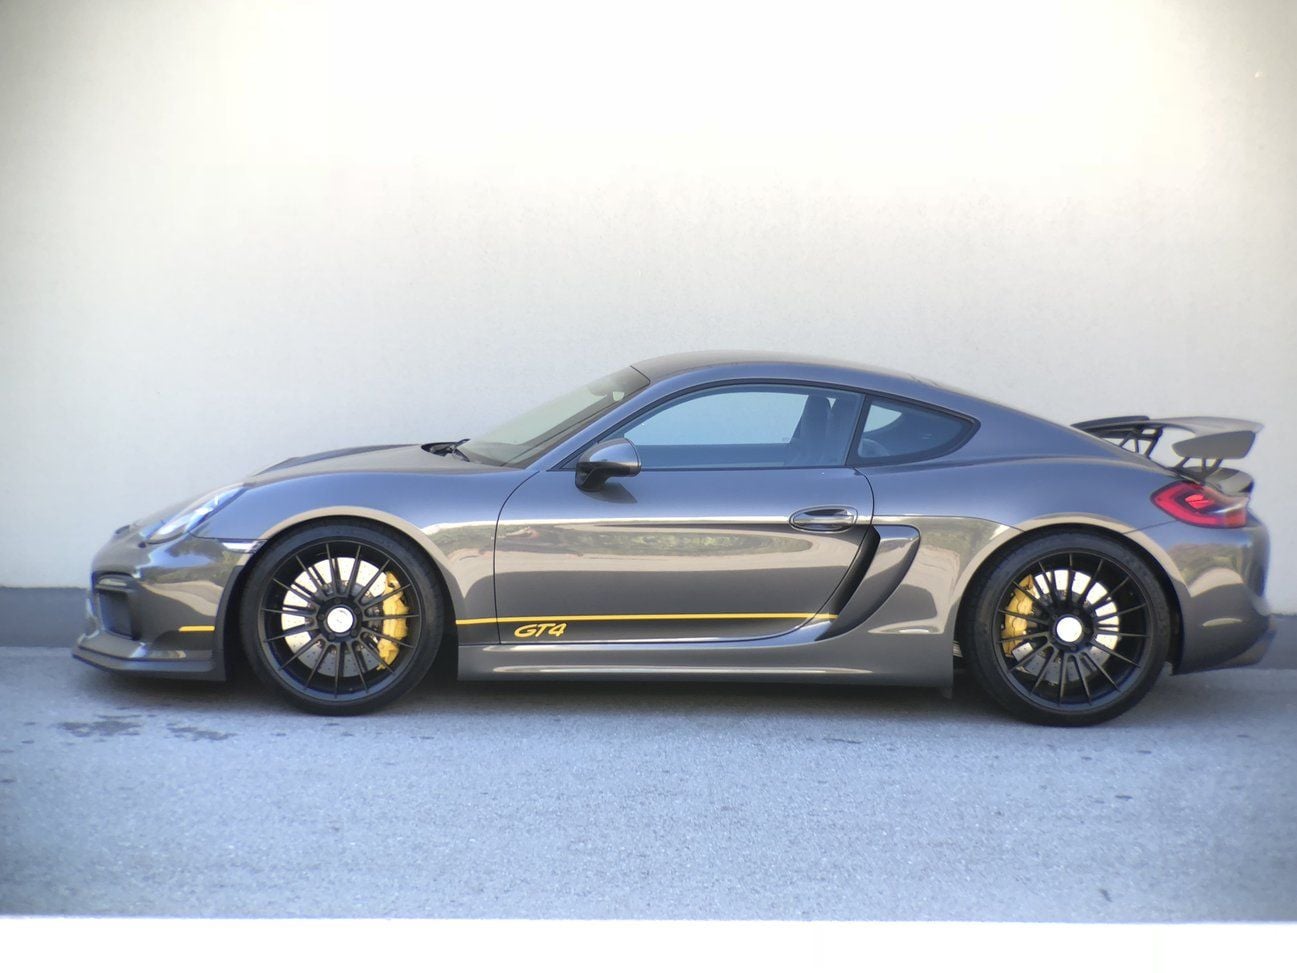 Wheels and Tires/Axles - FS: HRE FF15 20-inch Wheels - Tires - TPMS - Only 800 miles! - Used - 2016 Porsche Cayman GT4 - 2012 to 2016 Porsche Cayman - San Jose, CA 95131, United States